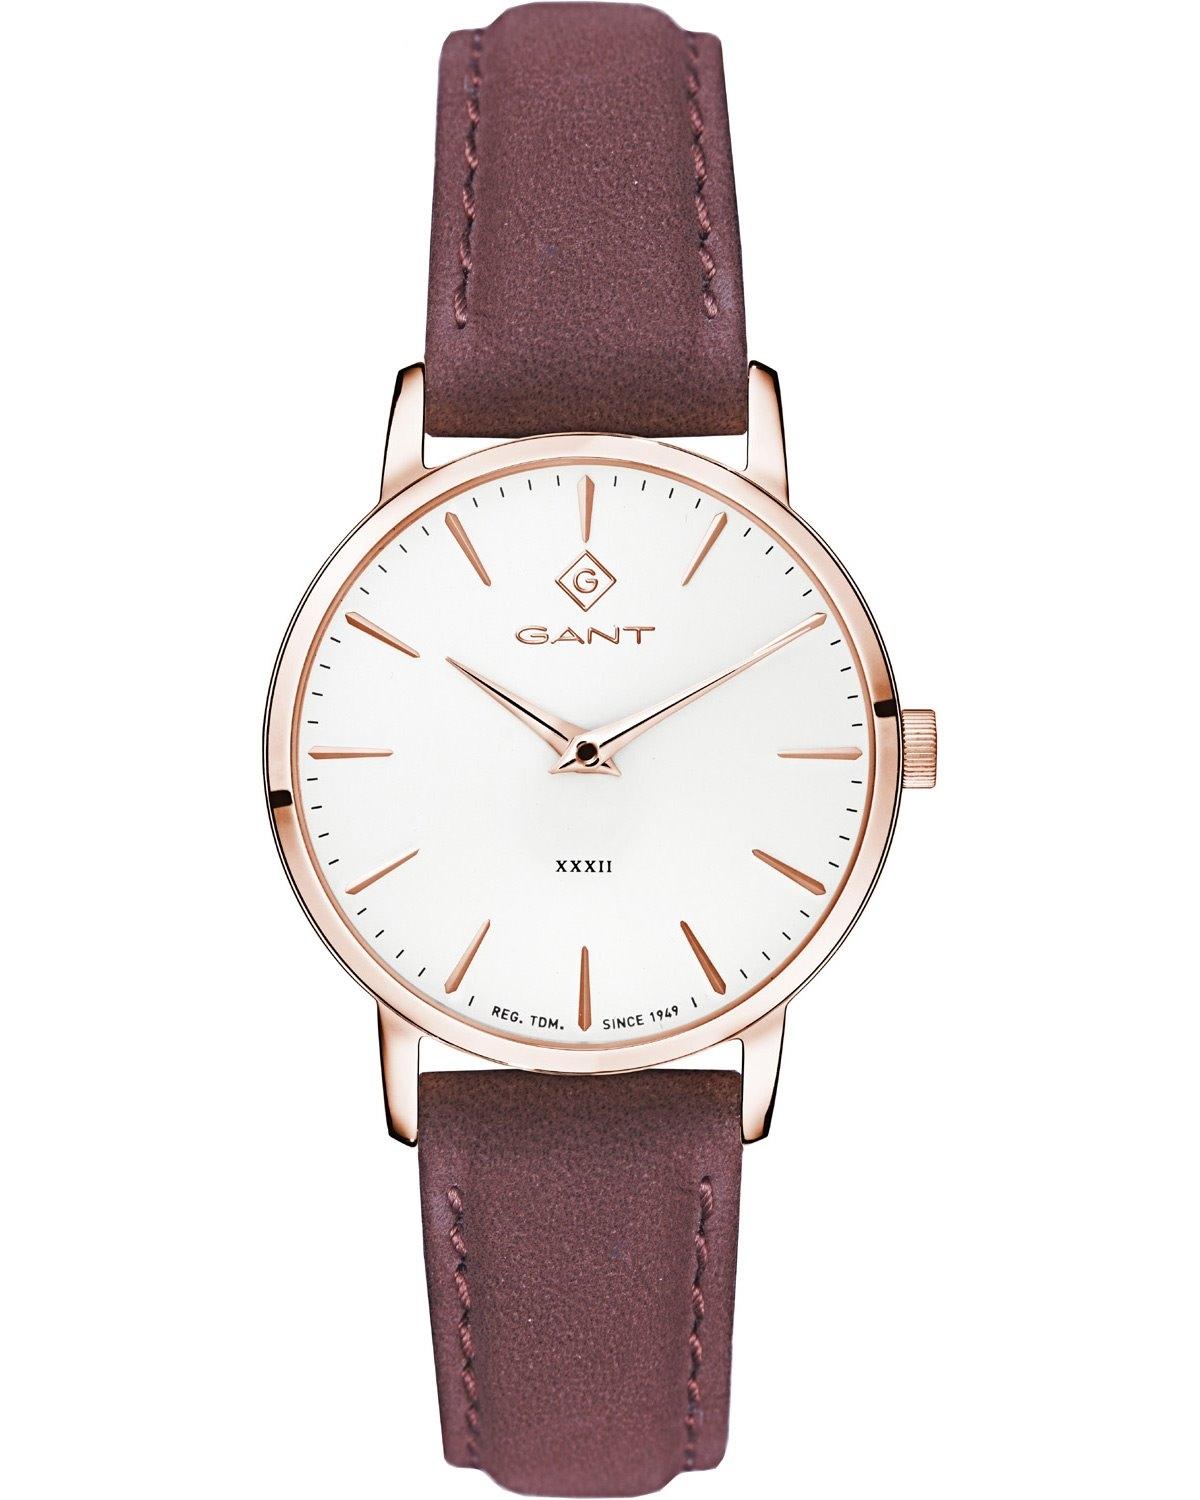 GANT Park Avenue 32 - G127007, Rose Gold case with Brown Leather Strap